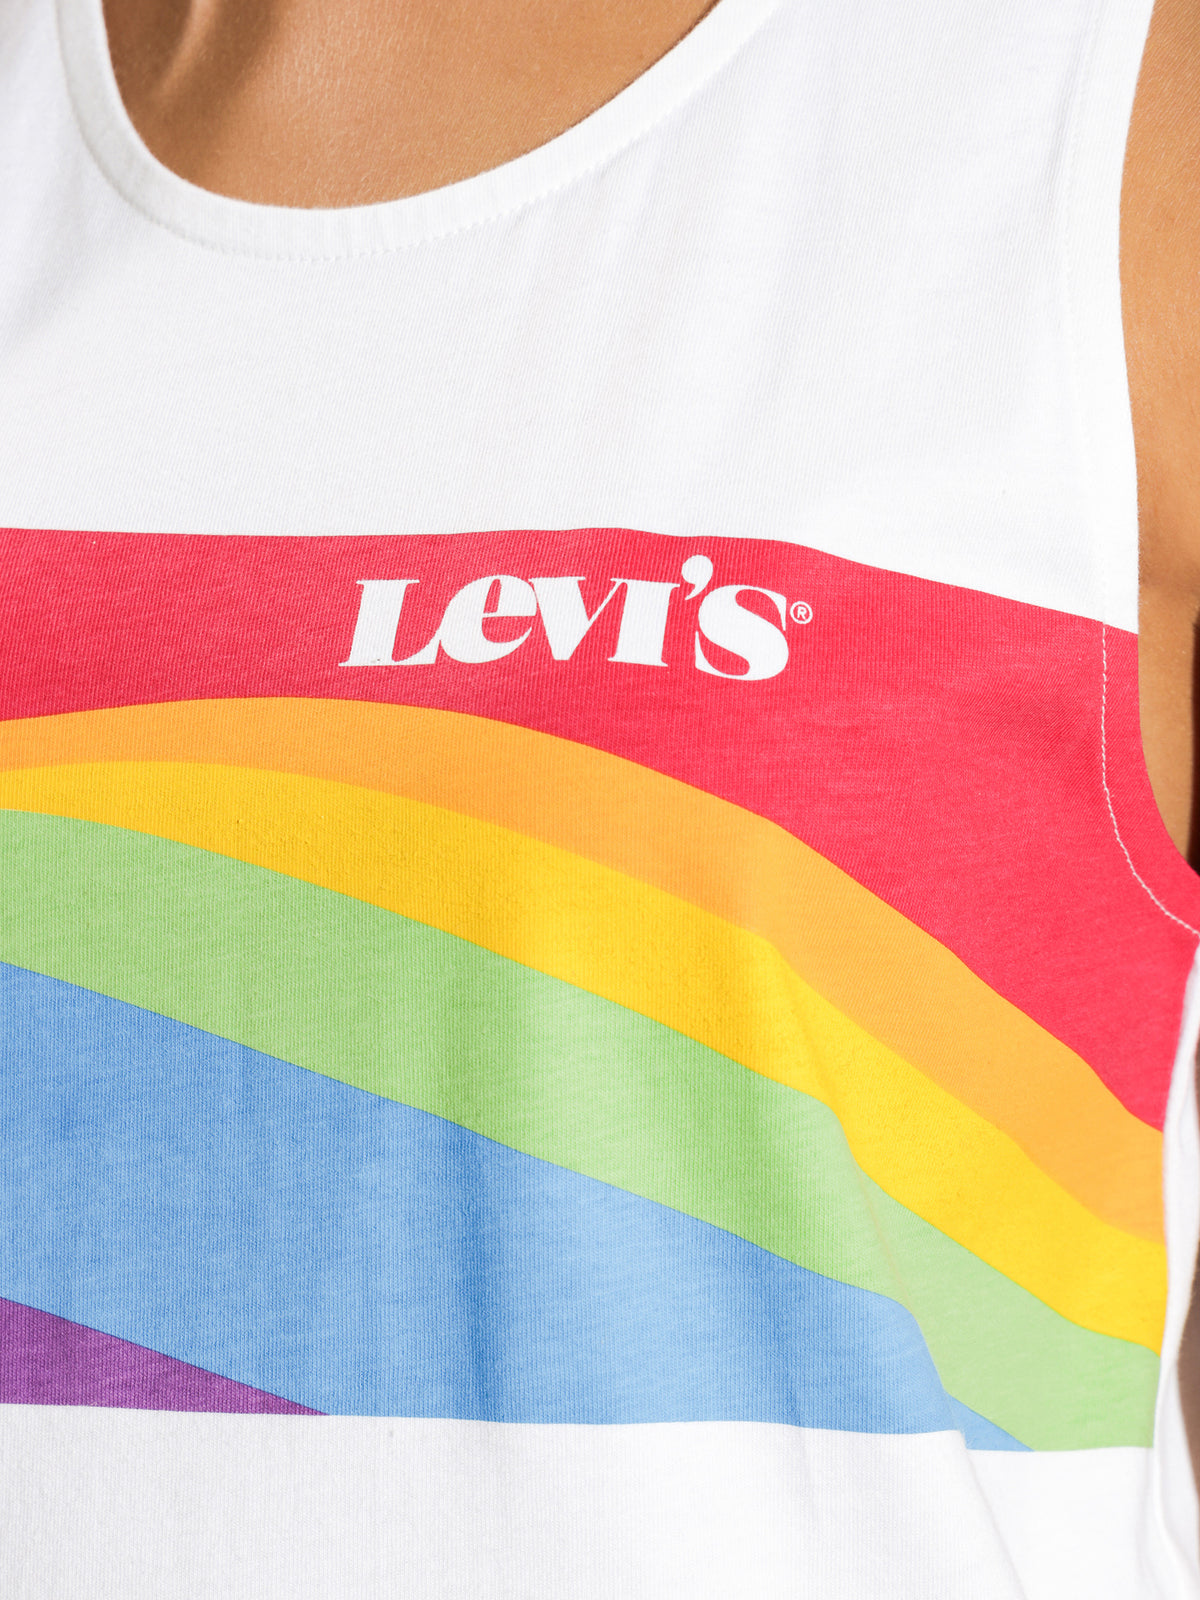 Pride Relaxed Graphic Tank in Wavy Logo White